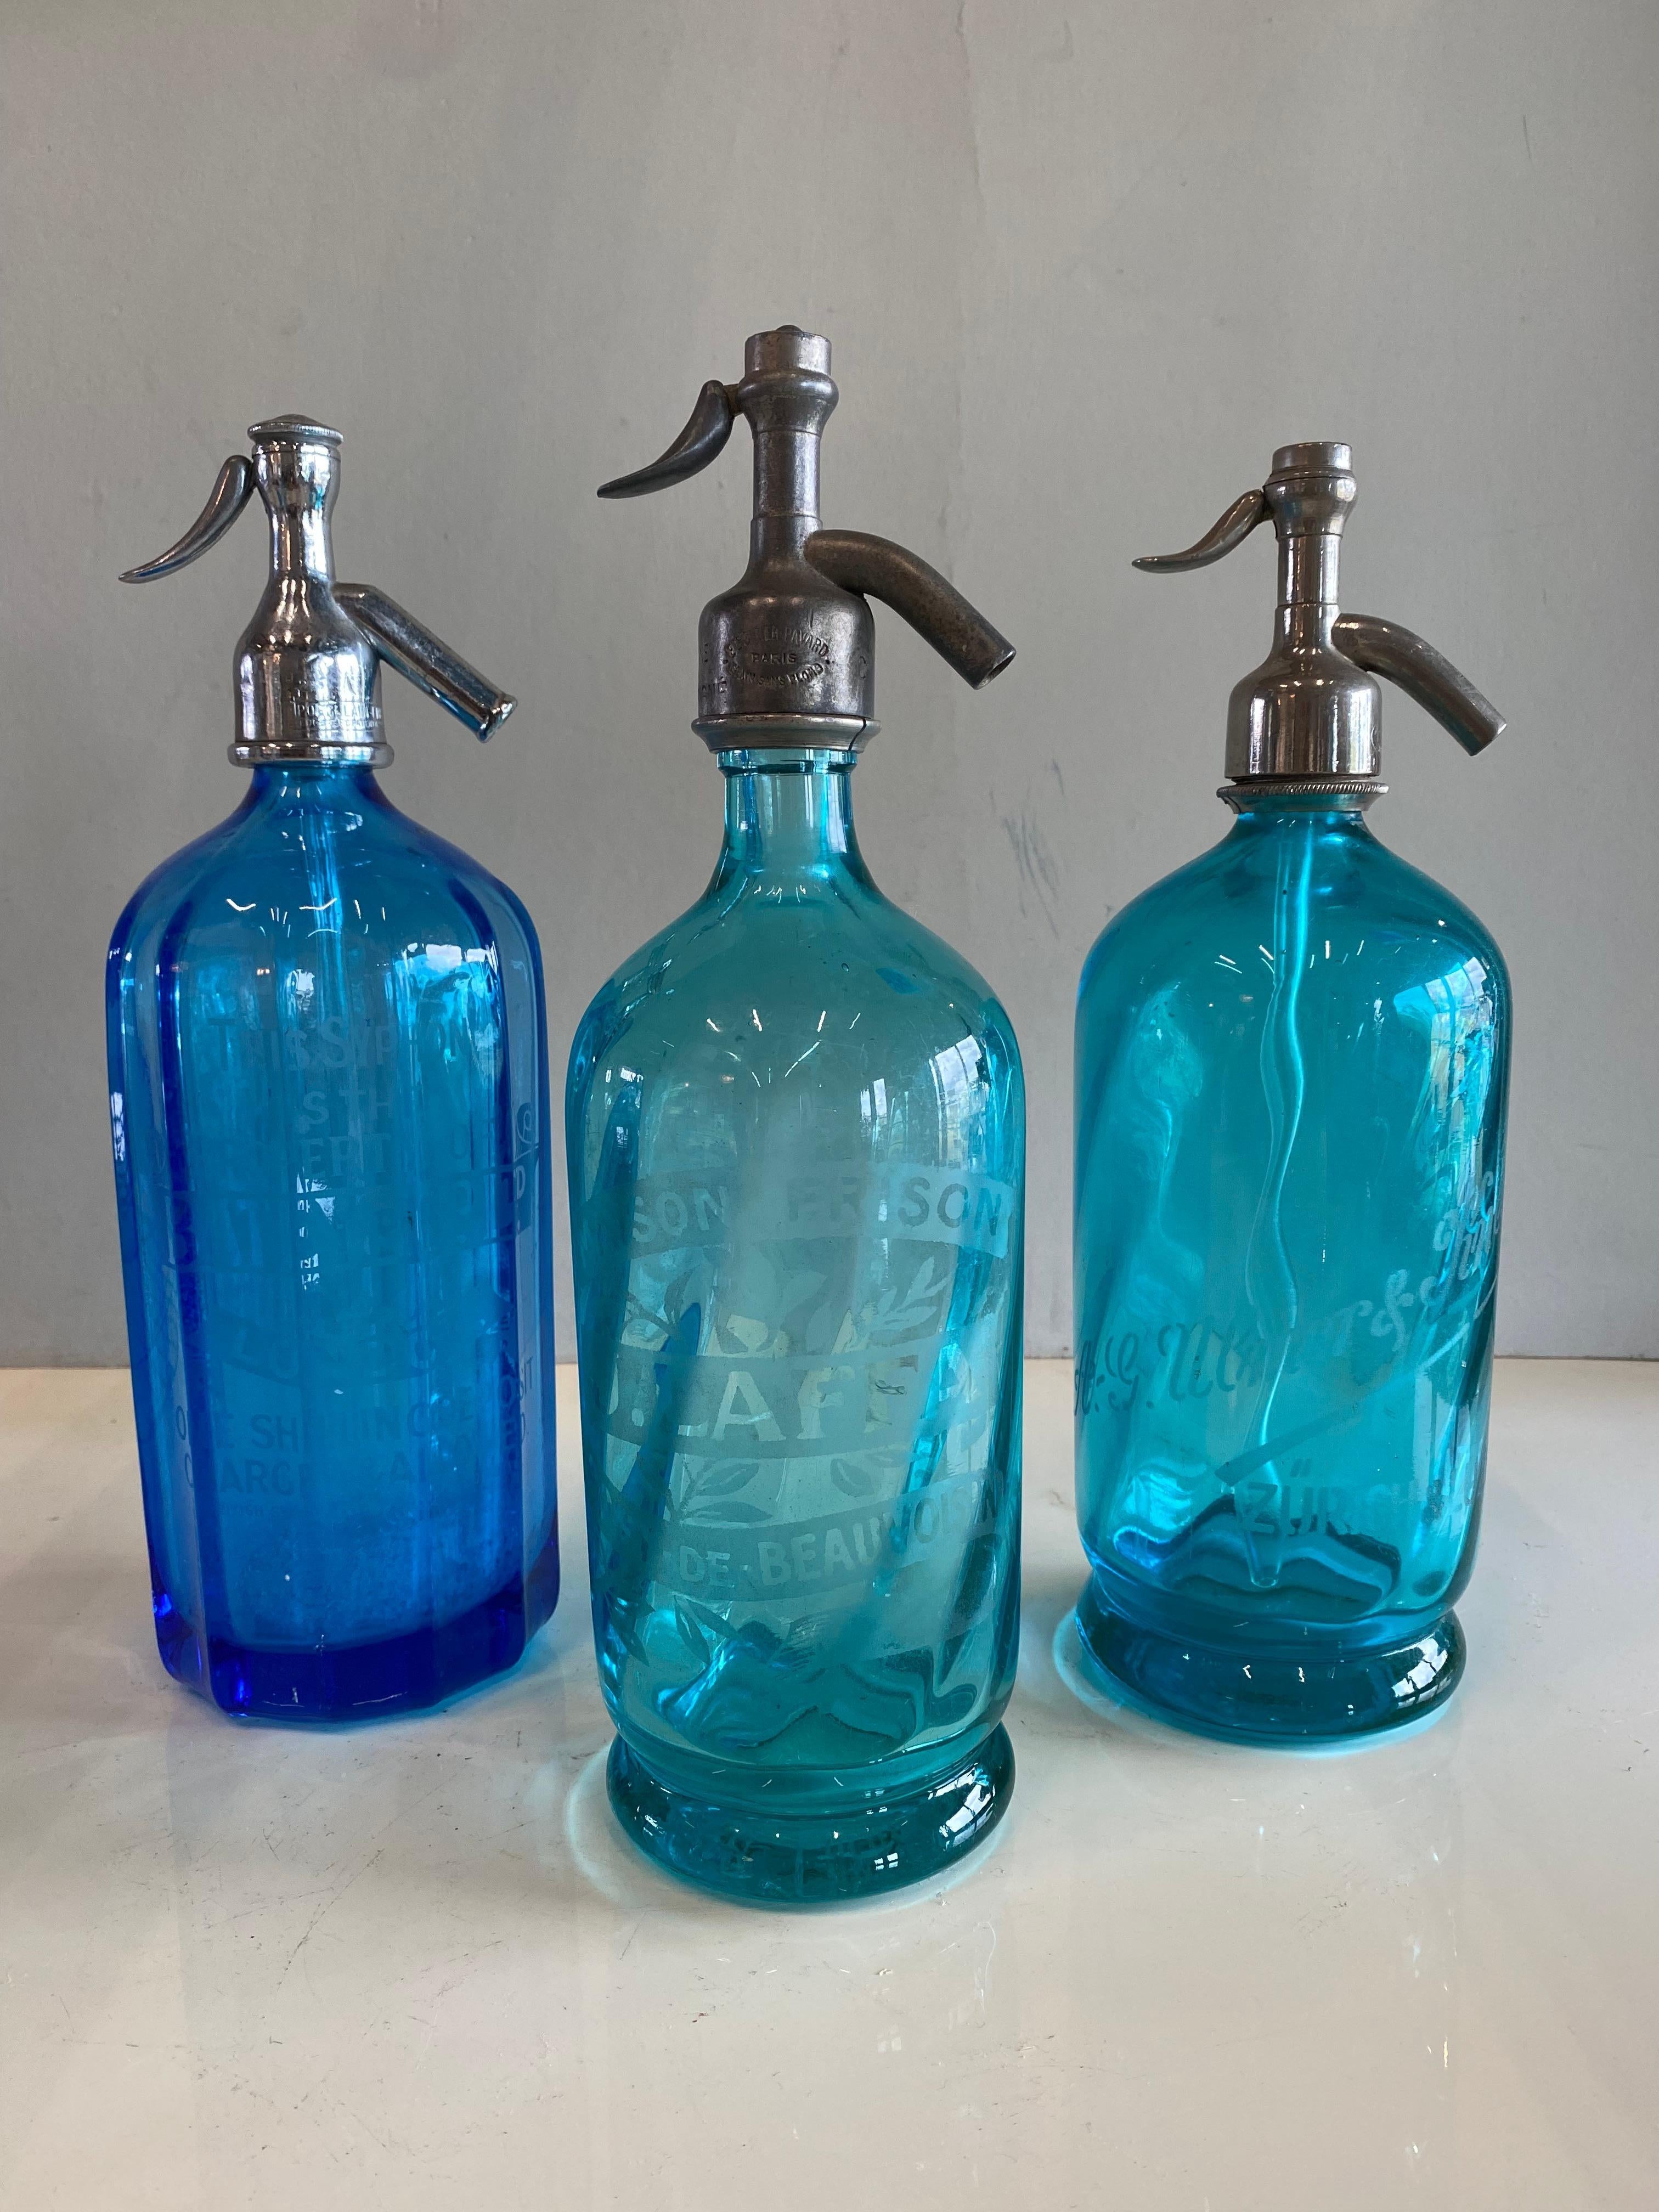 Antique siphons from France from the years around 1900. The bottles are made of thick heavy blue and turquoise glass and closures made of tin. 
In the cap of the blue bottle is stamped the word and the sequence of numbers „The property of Schweppes